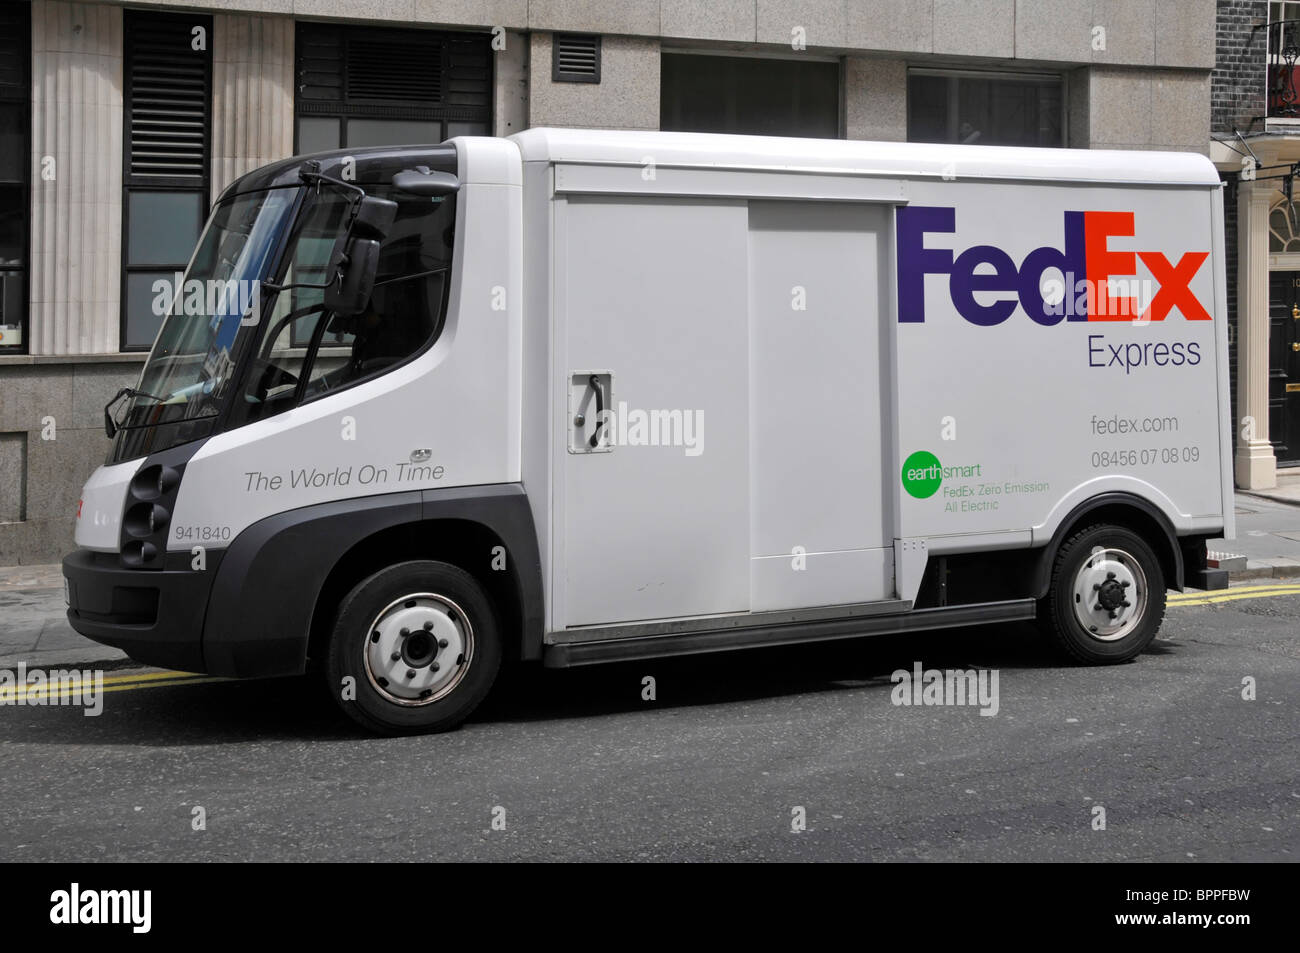 Side view FedEx Express all electric zero emission Fed Ex parcel delivery business van lorry truck parked in street in London England UK Stock Photo